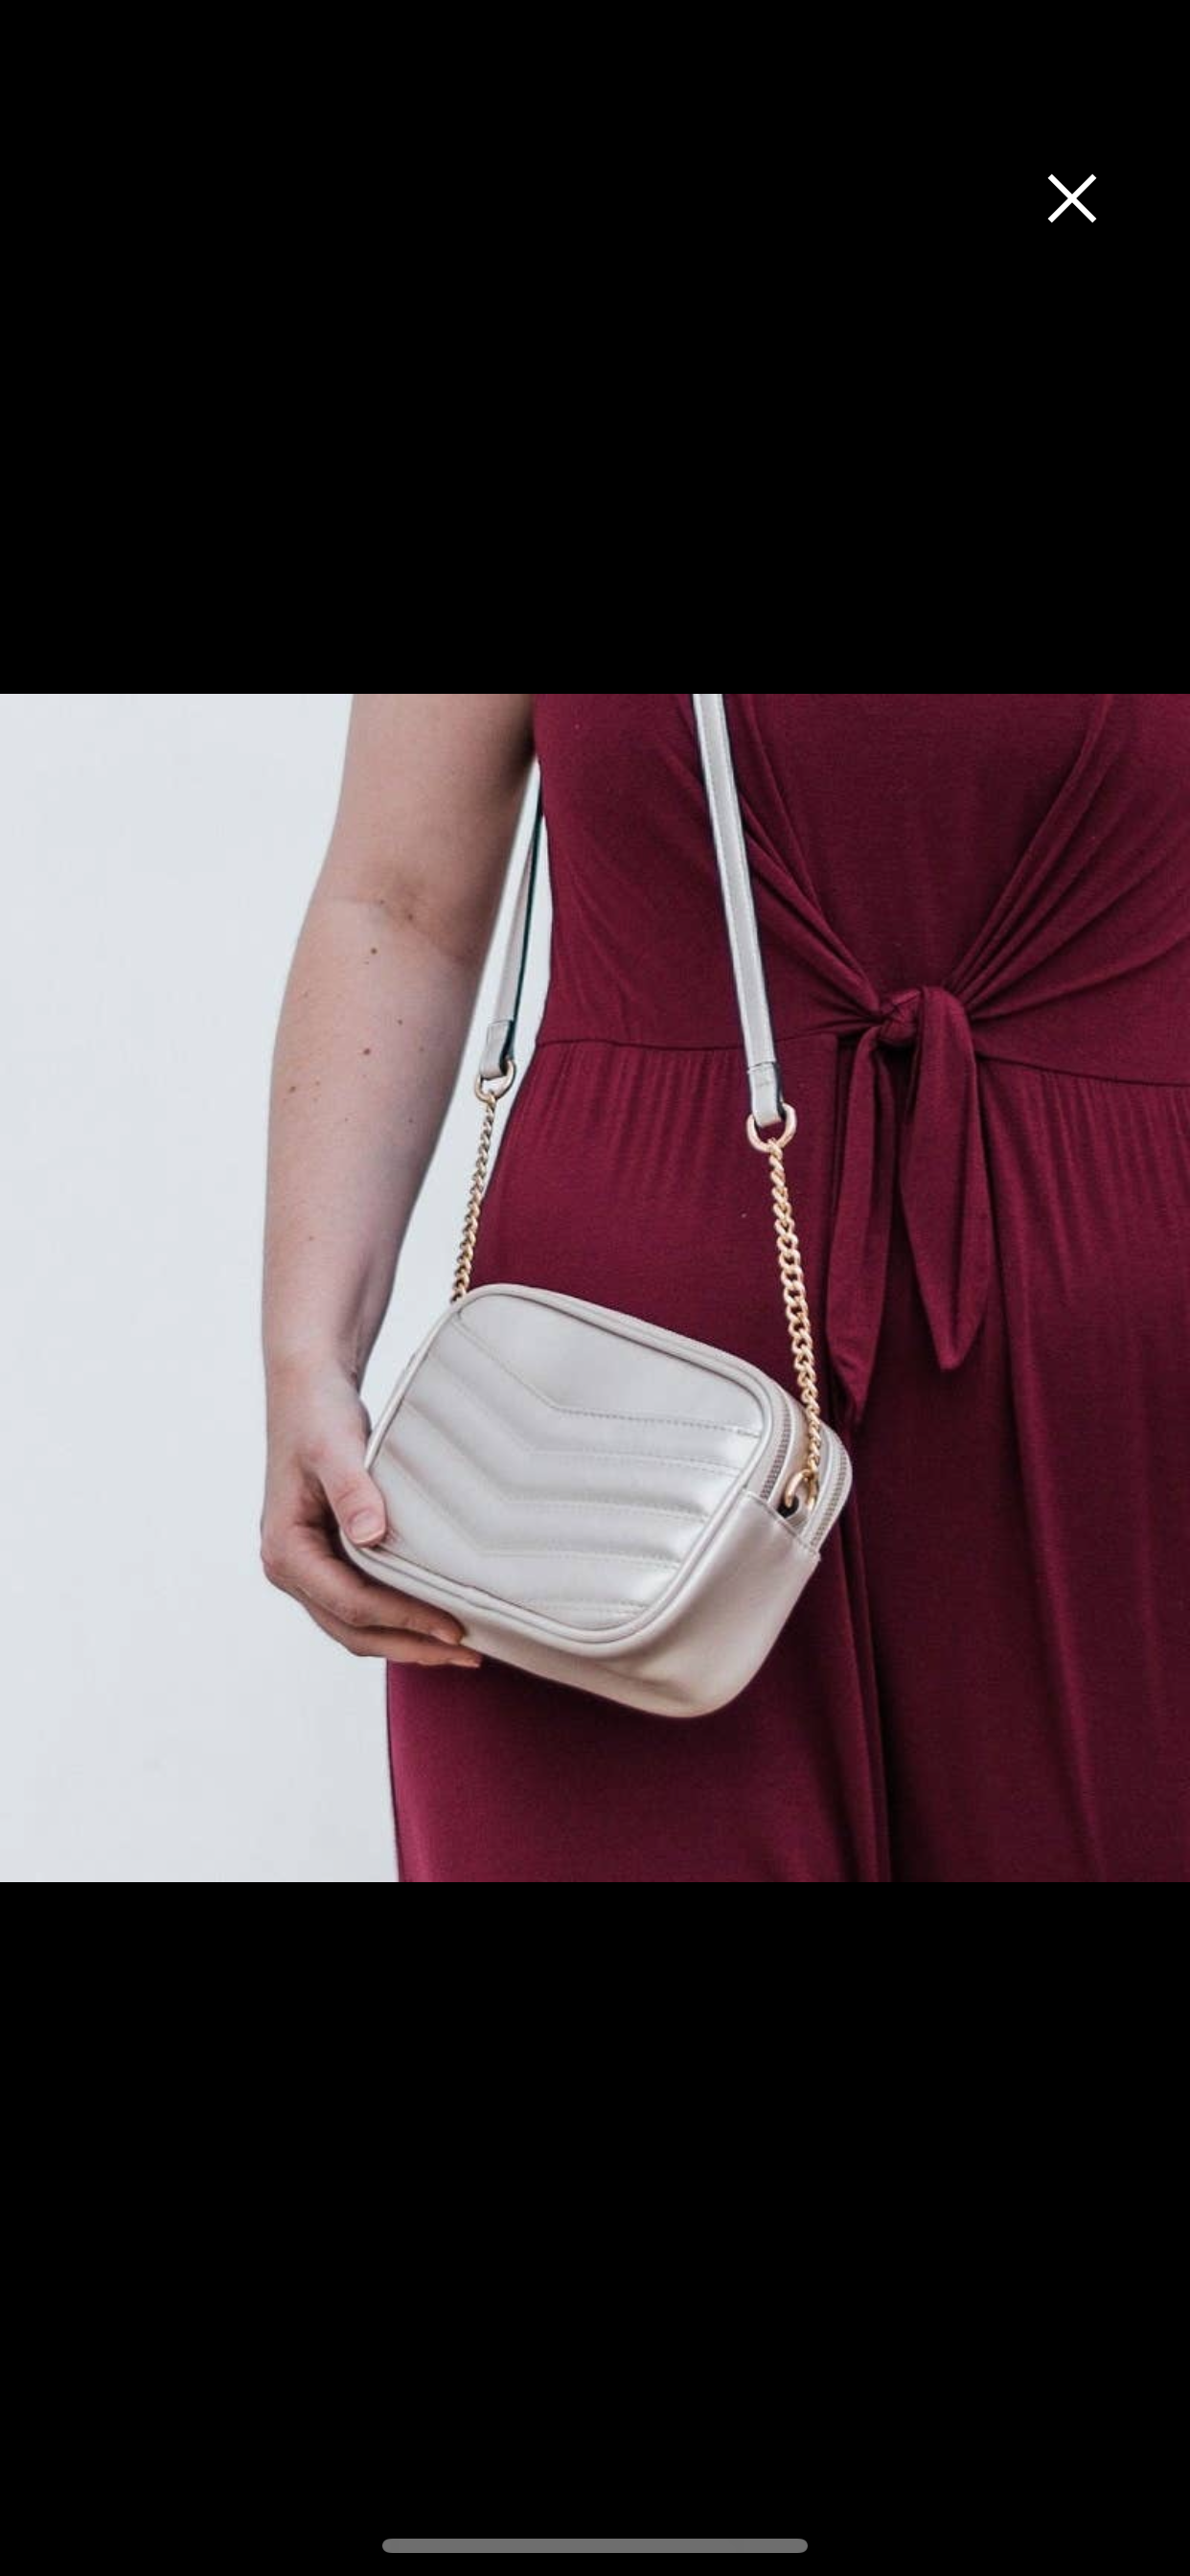 Trevi RFID  Touch Screen Purse